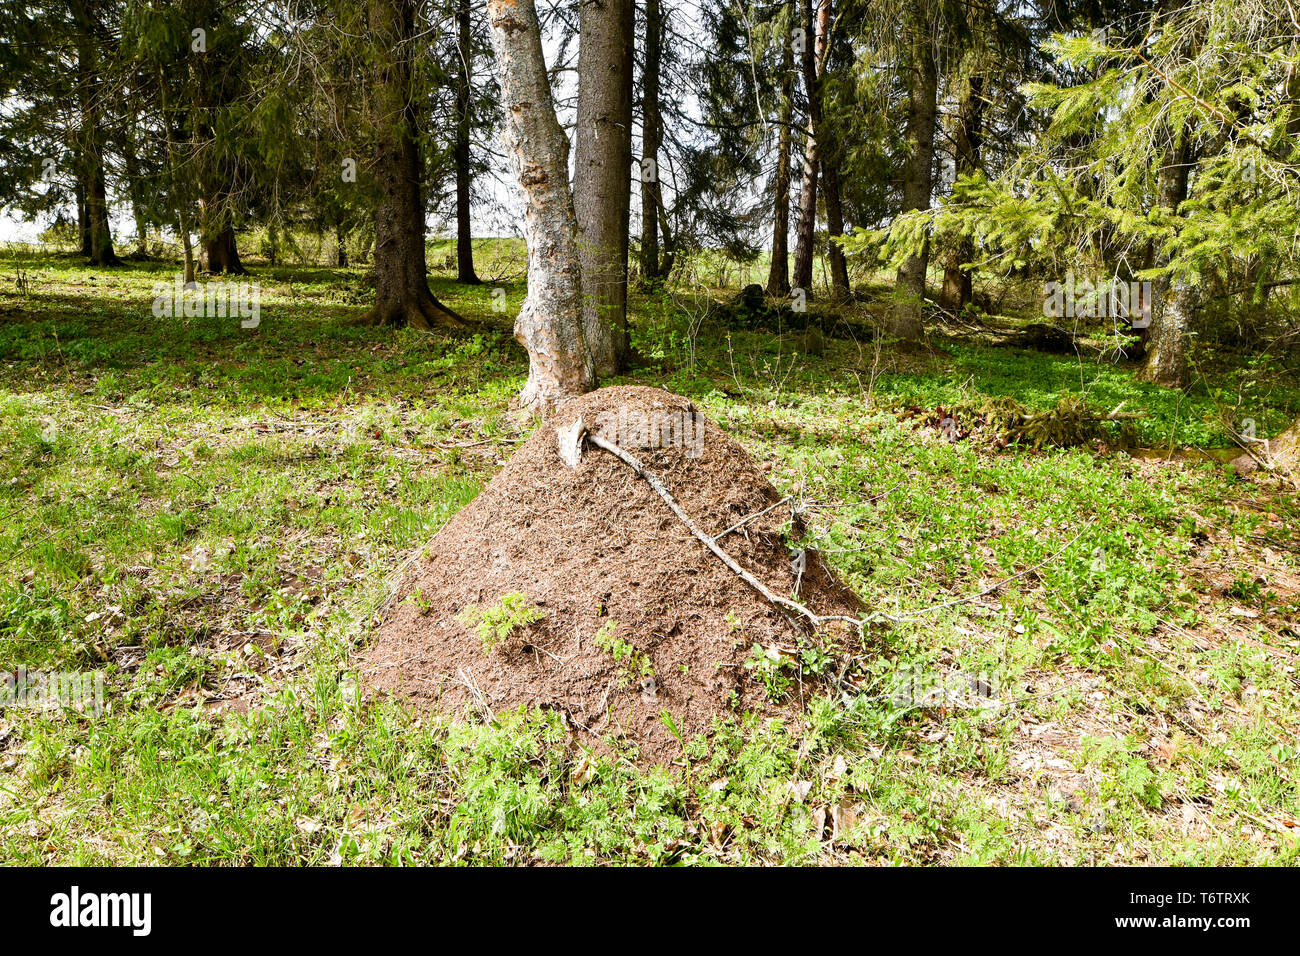 Big anthill in the forest. Stock Photo